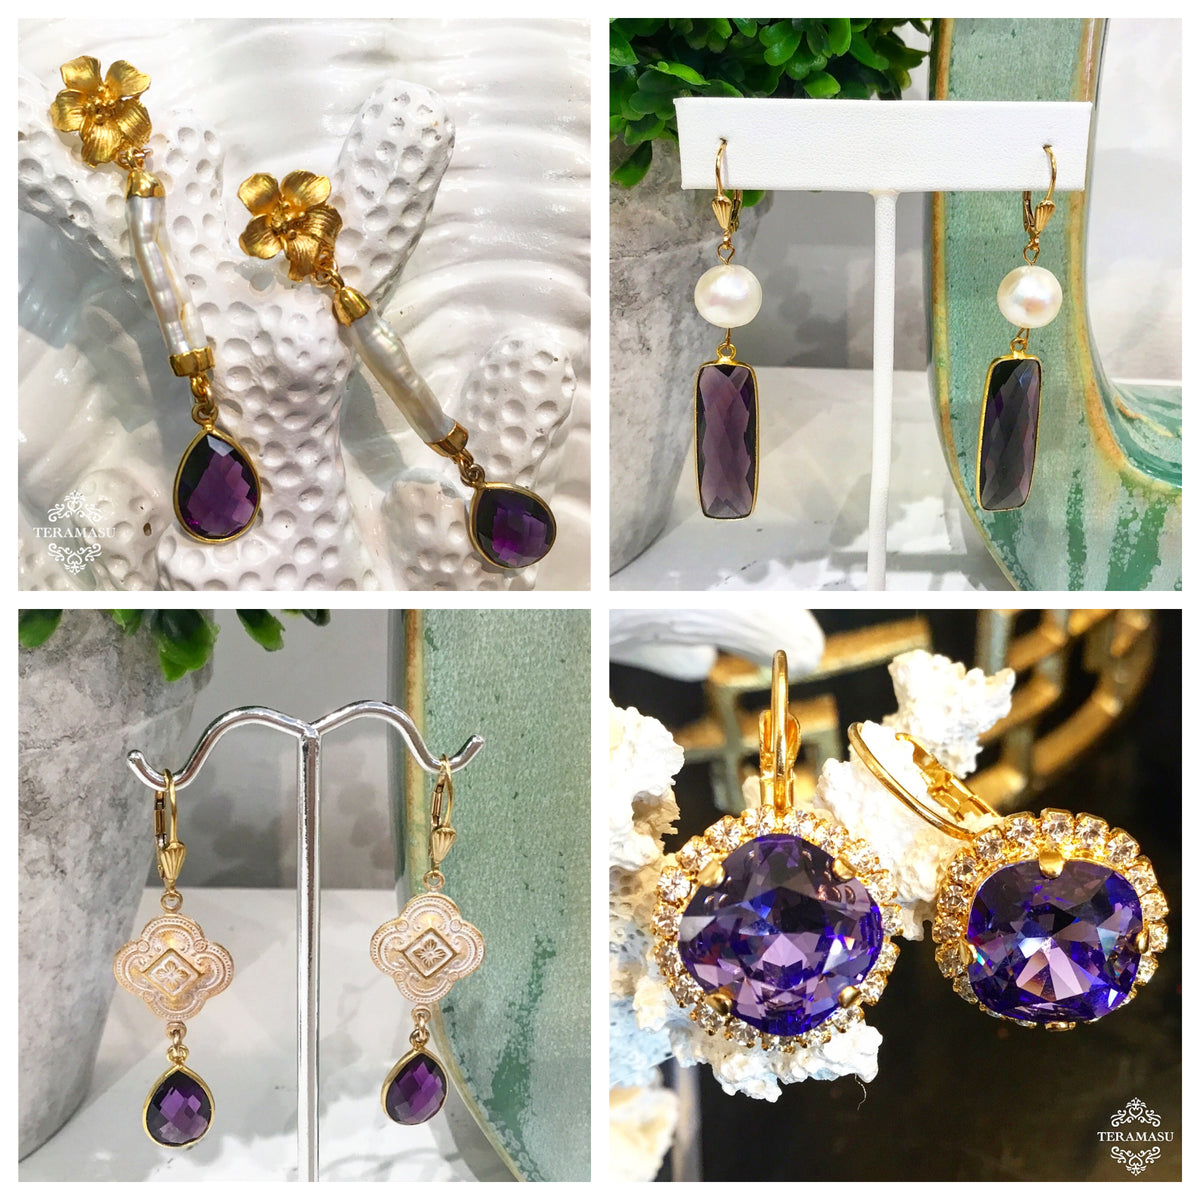 Monday Must-Haves: Gorgeous, Handmade Designer Purple Statement Earrings for Your One-of-a-Kind Style from Teramasu